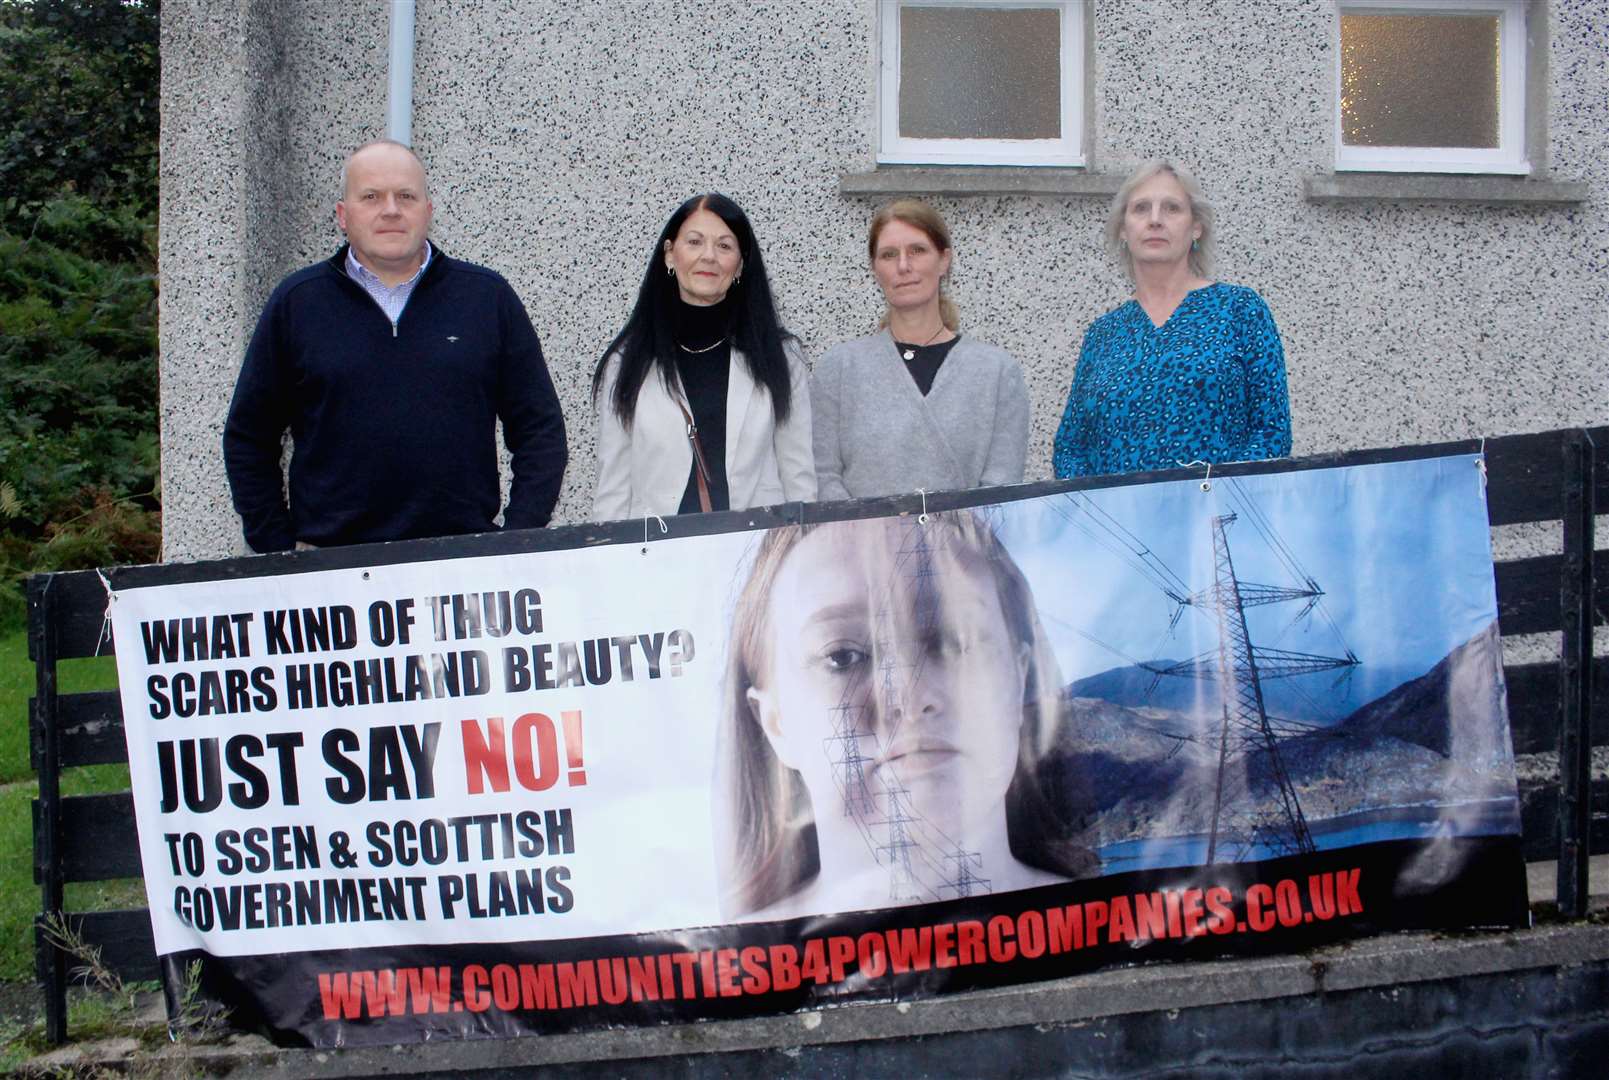 Outside the community hall in Dunbeath before the public meeting in September are (from left) Angus MacInnes, chairman of Berriedale and Dunbeath Community Council, Lynn Parker, secretary of Dunbeath/Berriedale Community Say NO to Pylons, and Denise Davis and Lyndsey Ward from Communities B4 Power Companies.